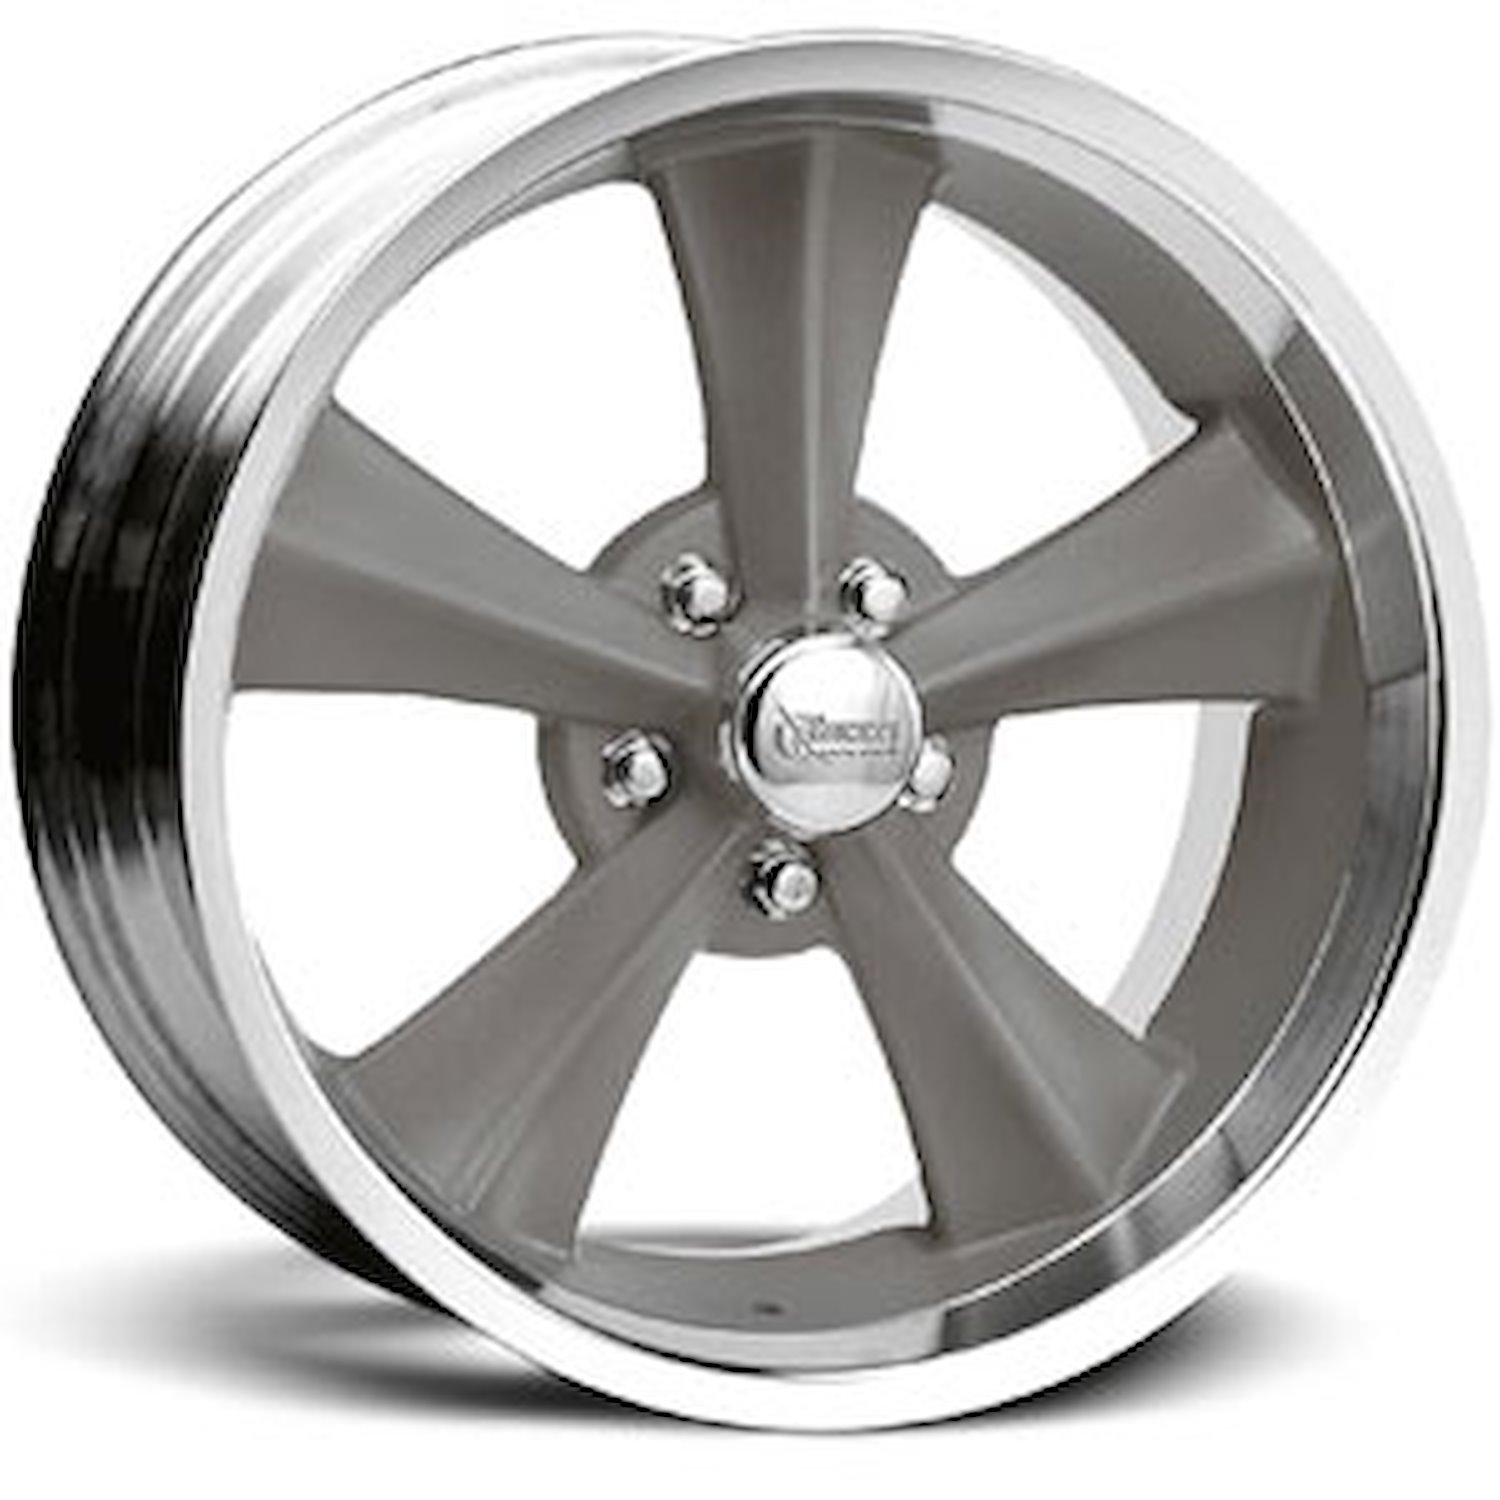 Booster Wheel - Gray Size: 18" x 9"